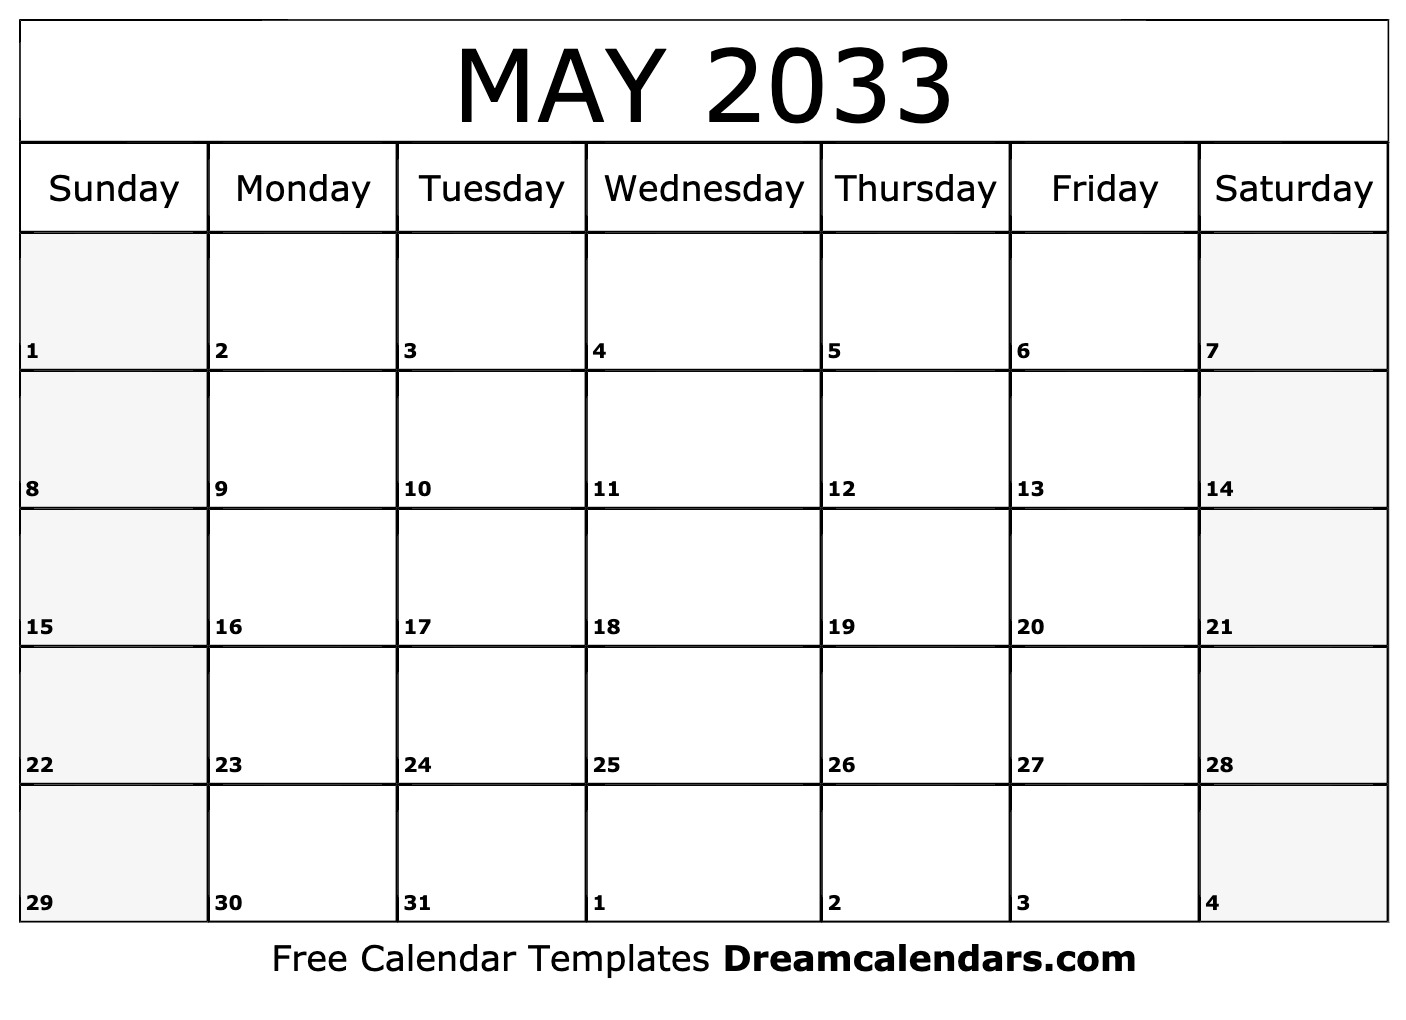 May 2033 Calendar - Free Printable with Holidays and Observances